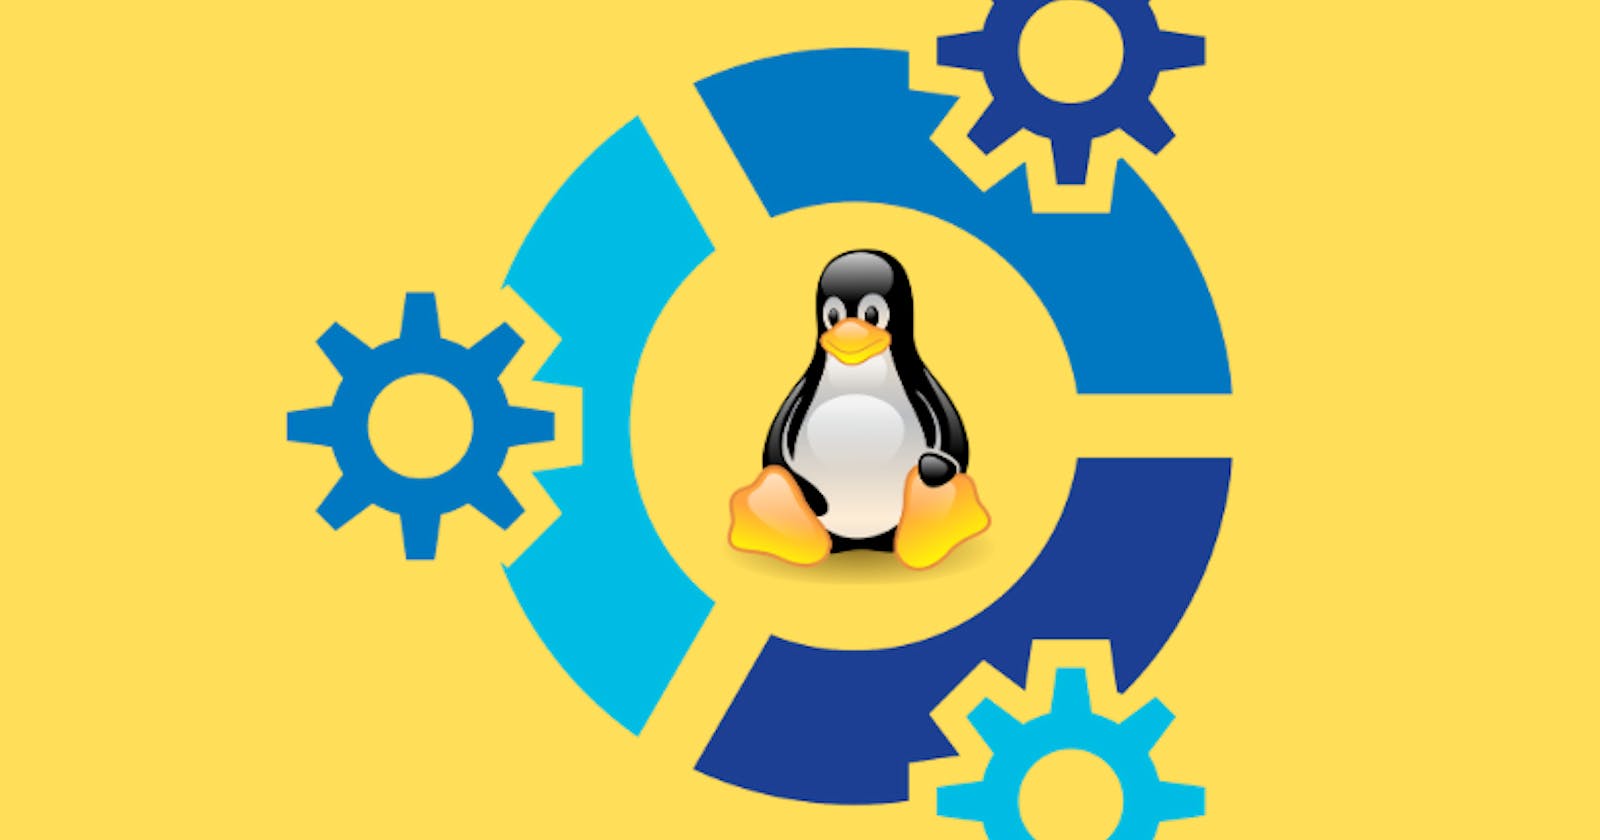 How to create a system service in Linux